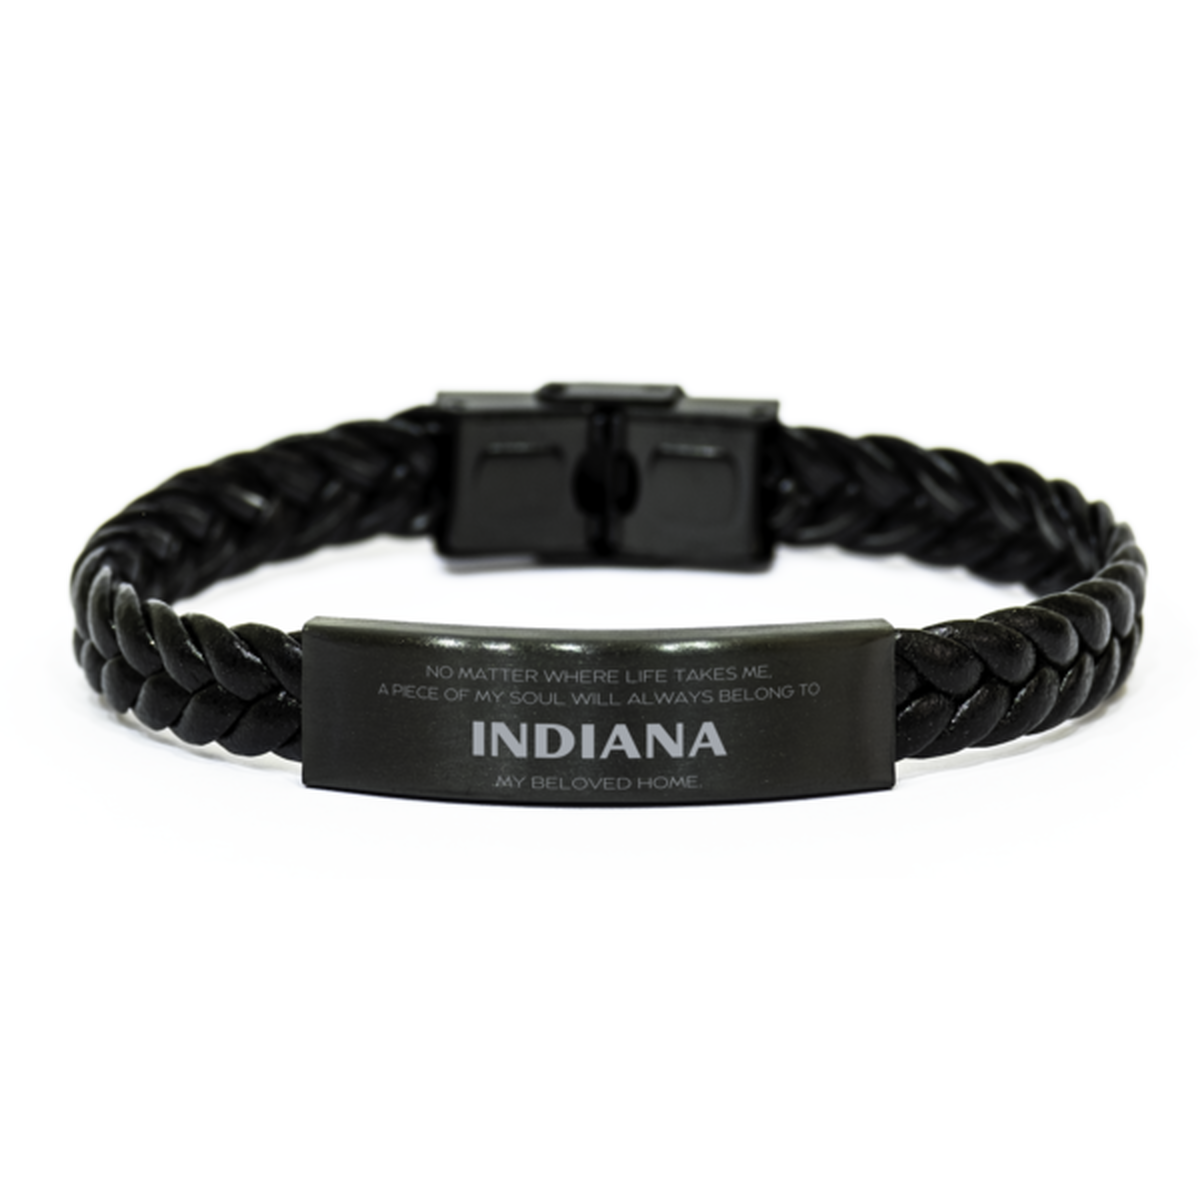 Love Indiana State Gifts, My soul will always belong to Indiana, Proud Braided Leather Bracelet, Birthday Unique Gifts For Indiana Men, Women, Friends